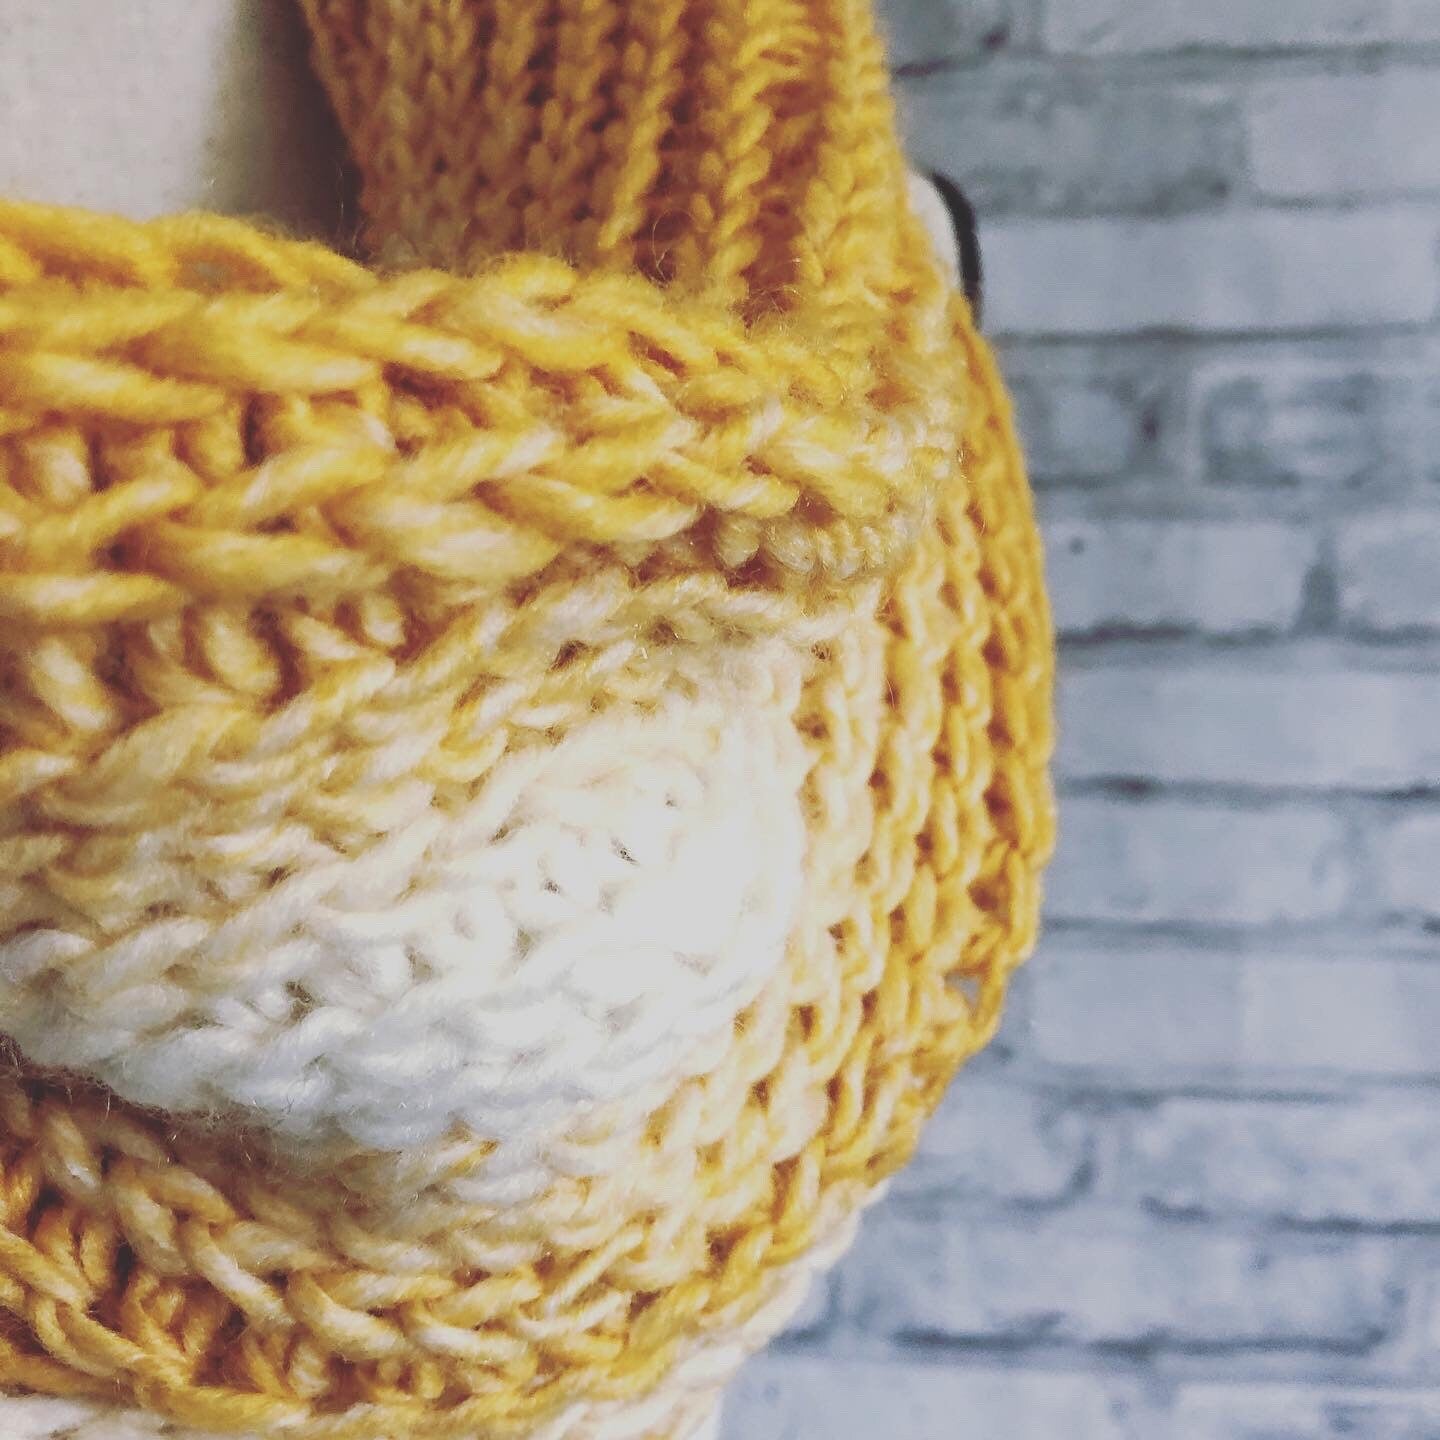 Knit Scarf. Mustard and Cream Knit Cowl. Golden Yellow and White Crochet Cowl. Ombre Colored Cowl. Women's Accessories.